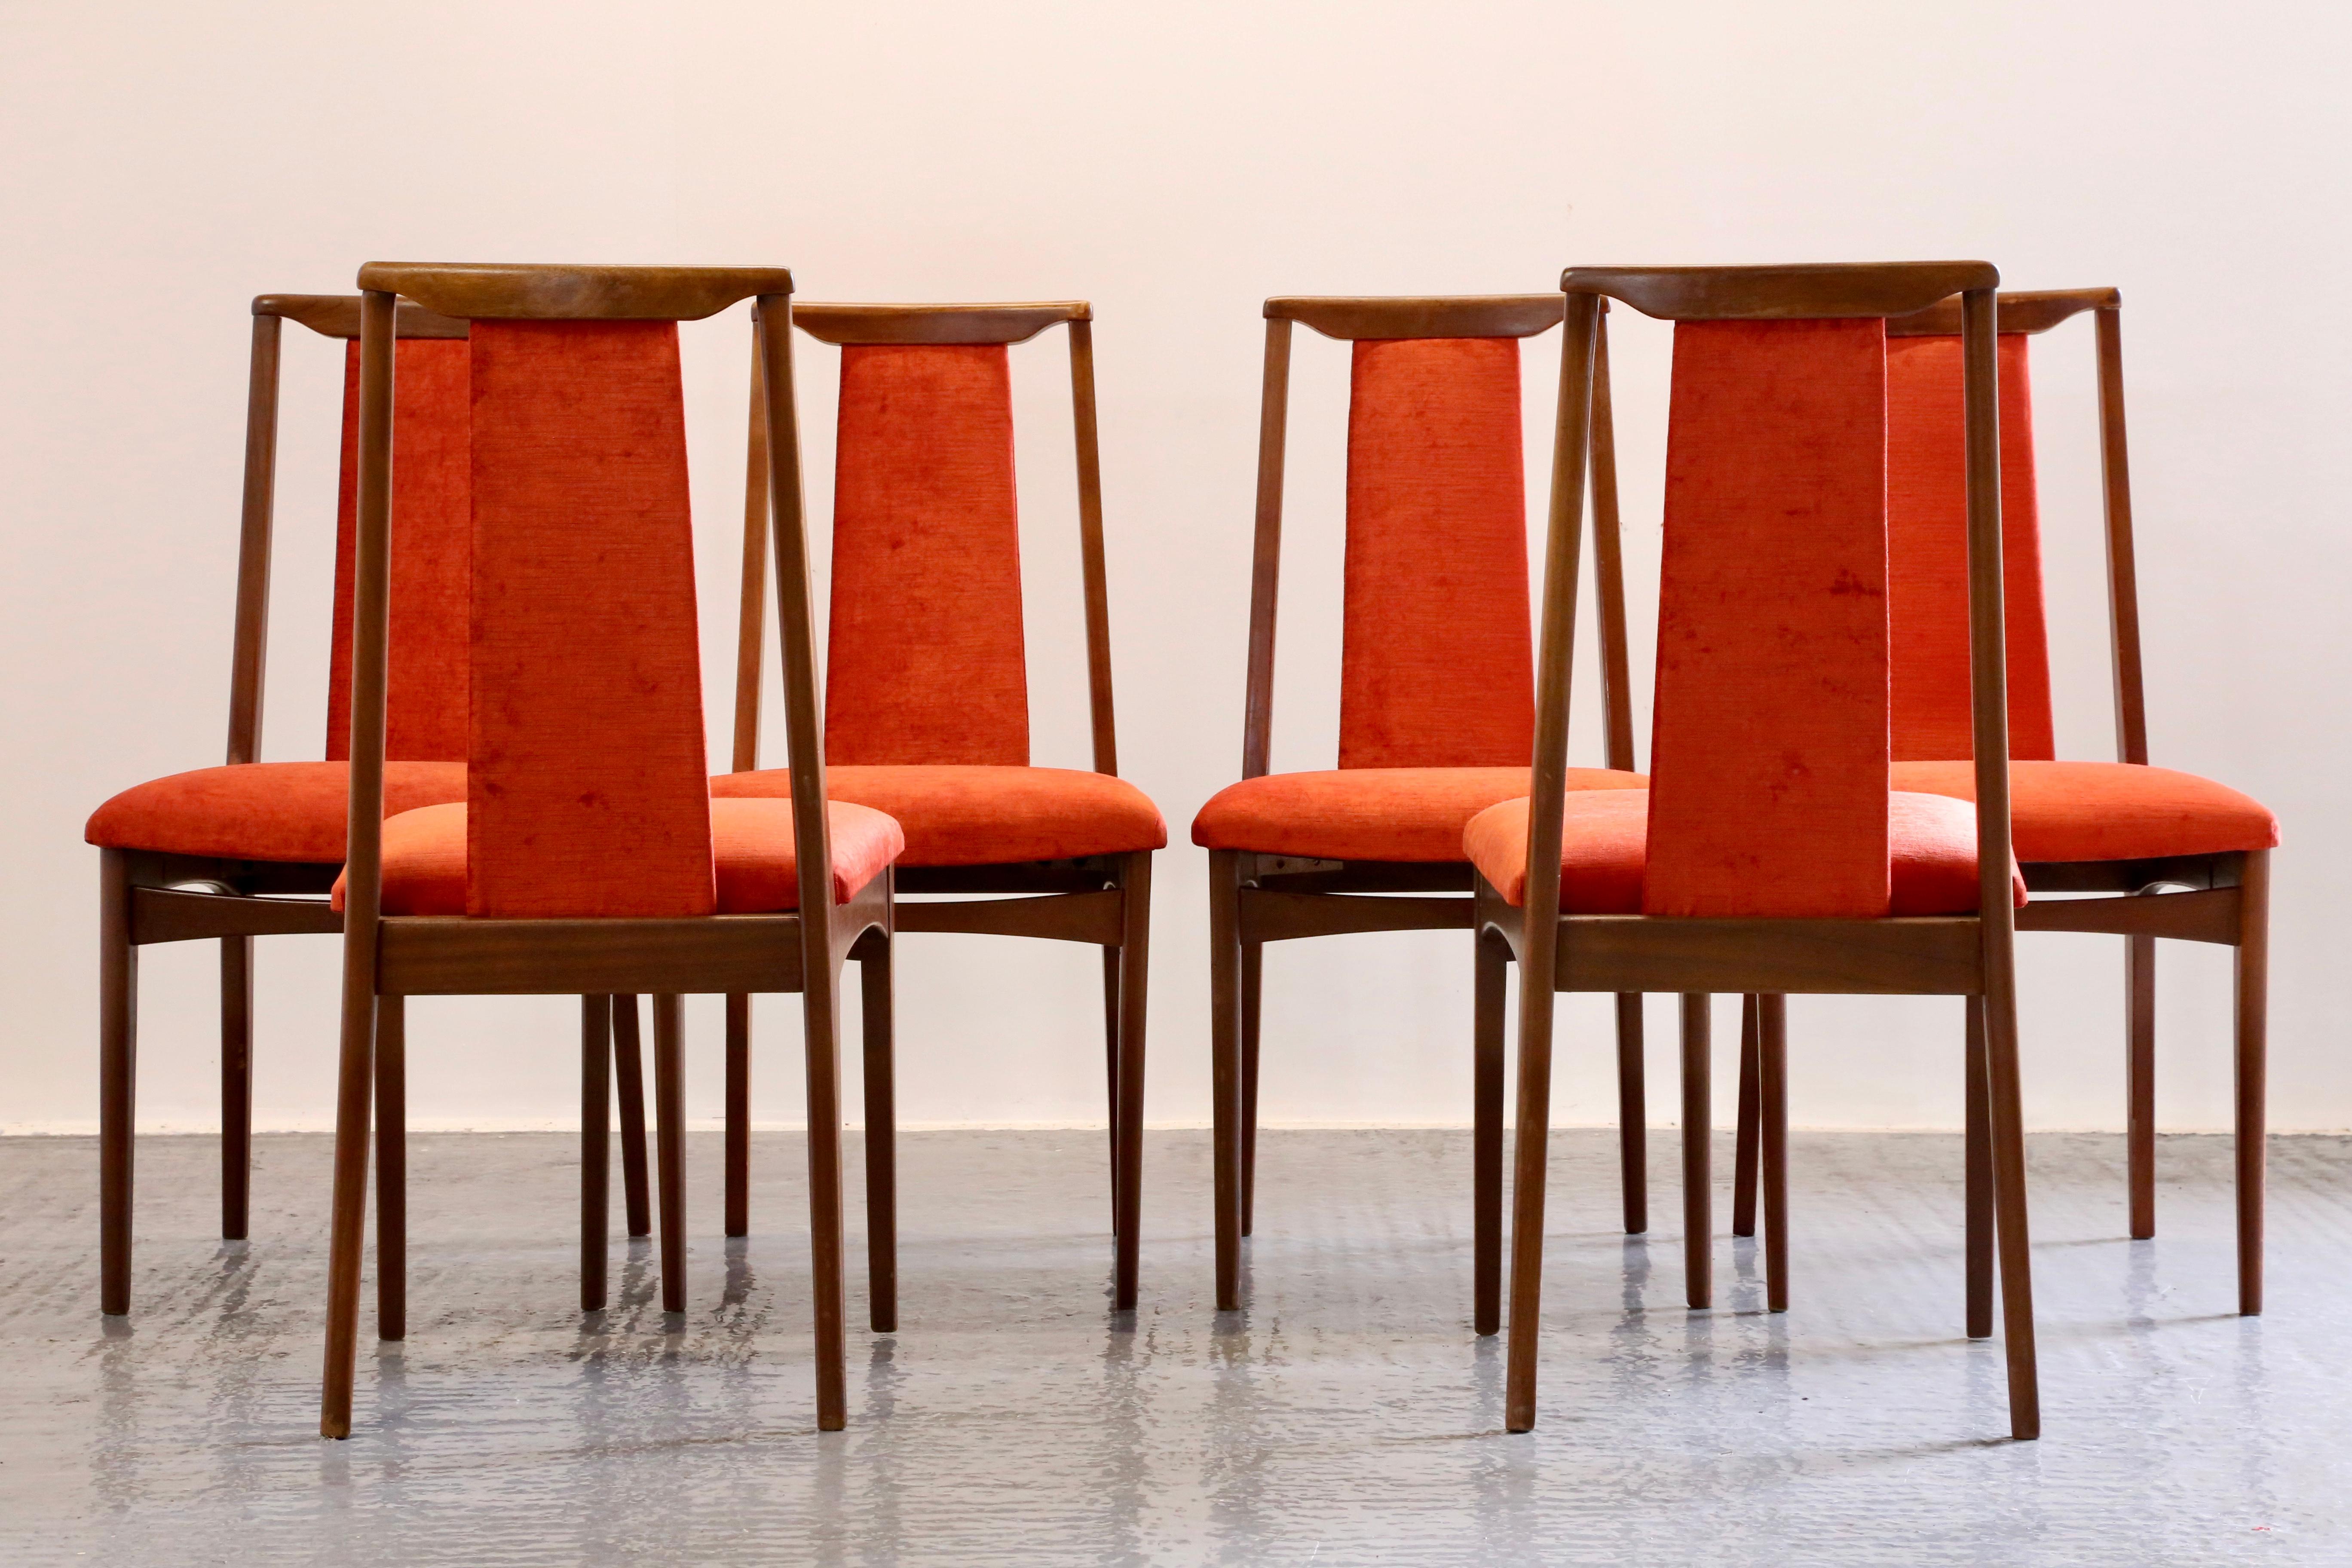 Refined Simplicity: Set of 6 Mid-Century Modern Dining Chairs
Embrace the essence of understated elegance with our set of six mid-century modern dining chairs. Crafted to perfection, each chair features a high back adorned with a delicately carved